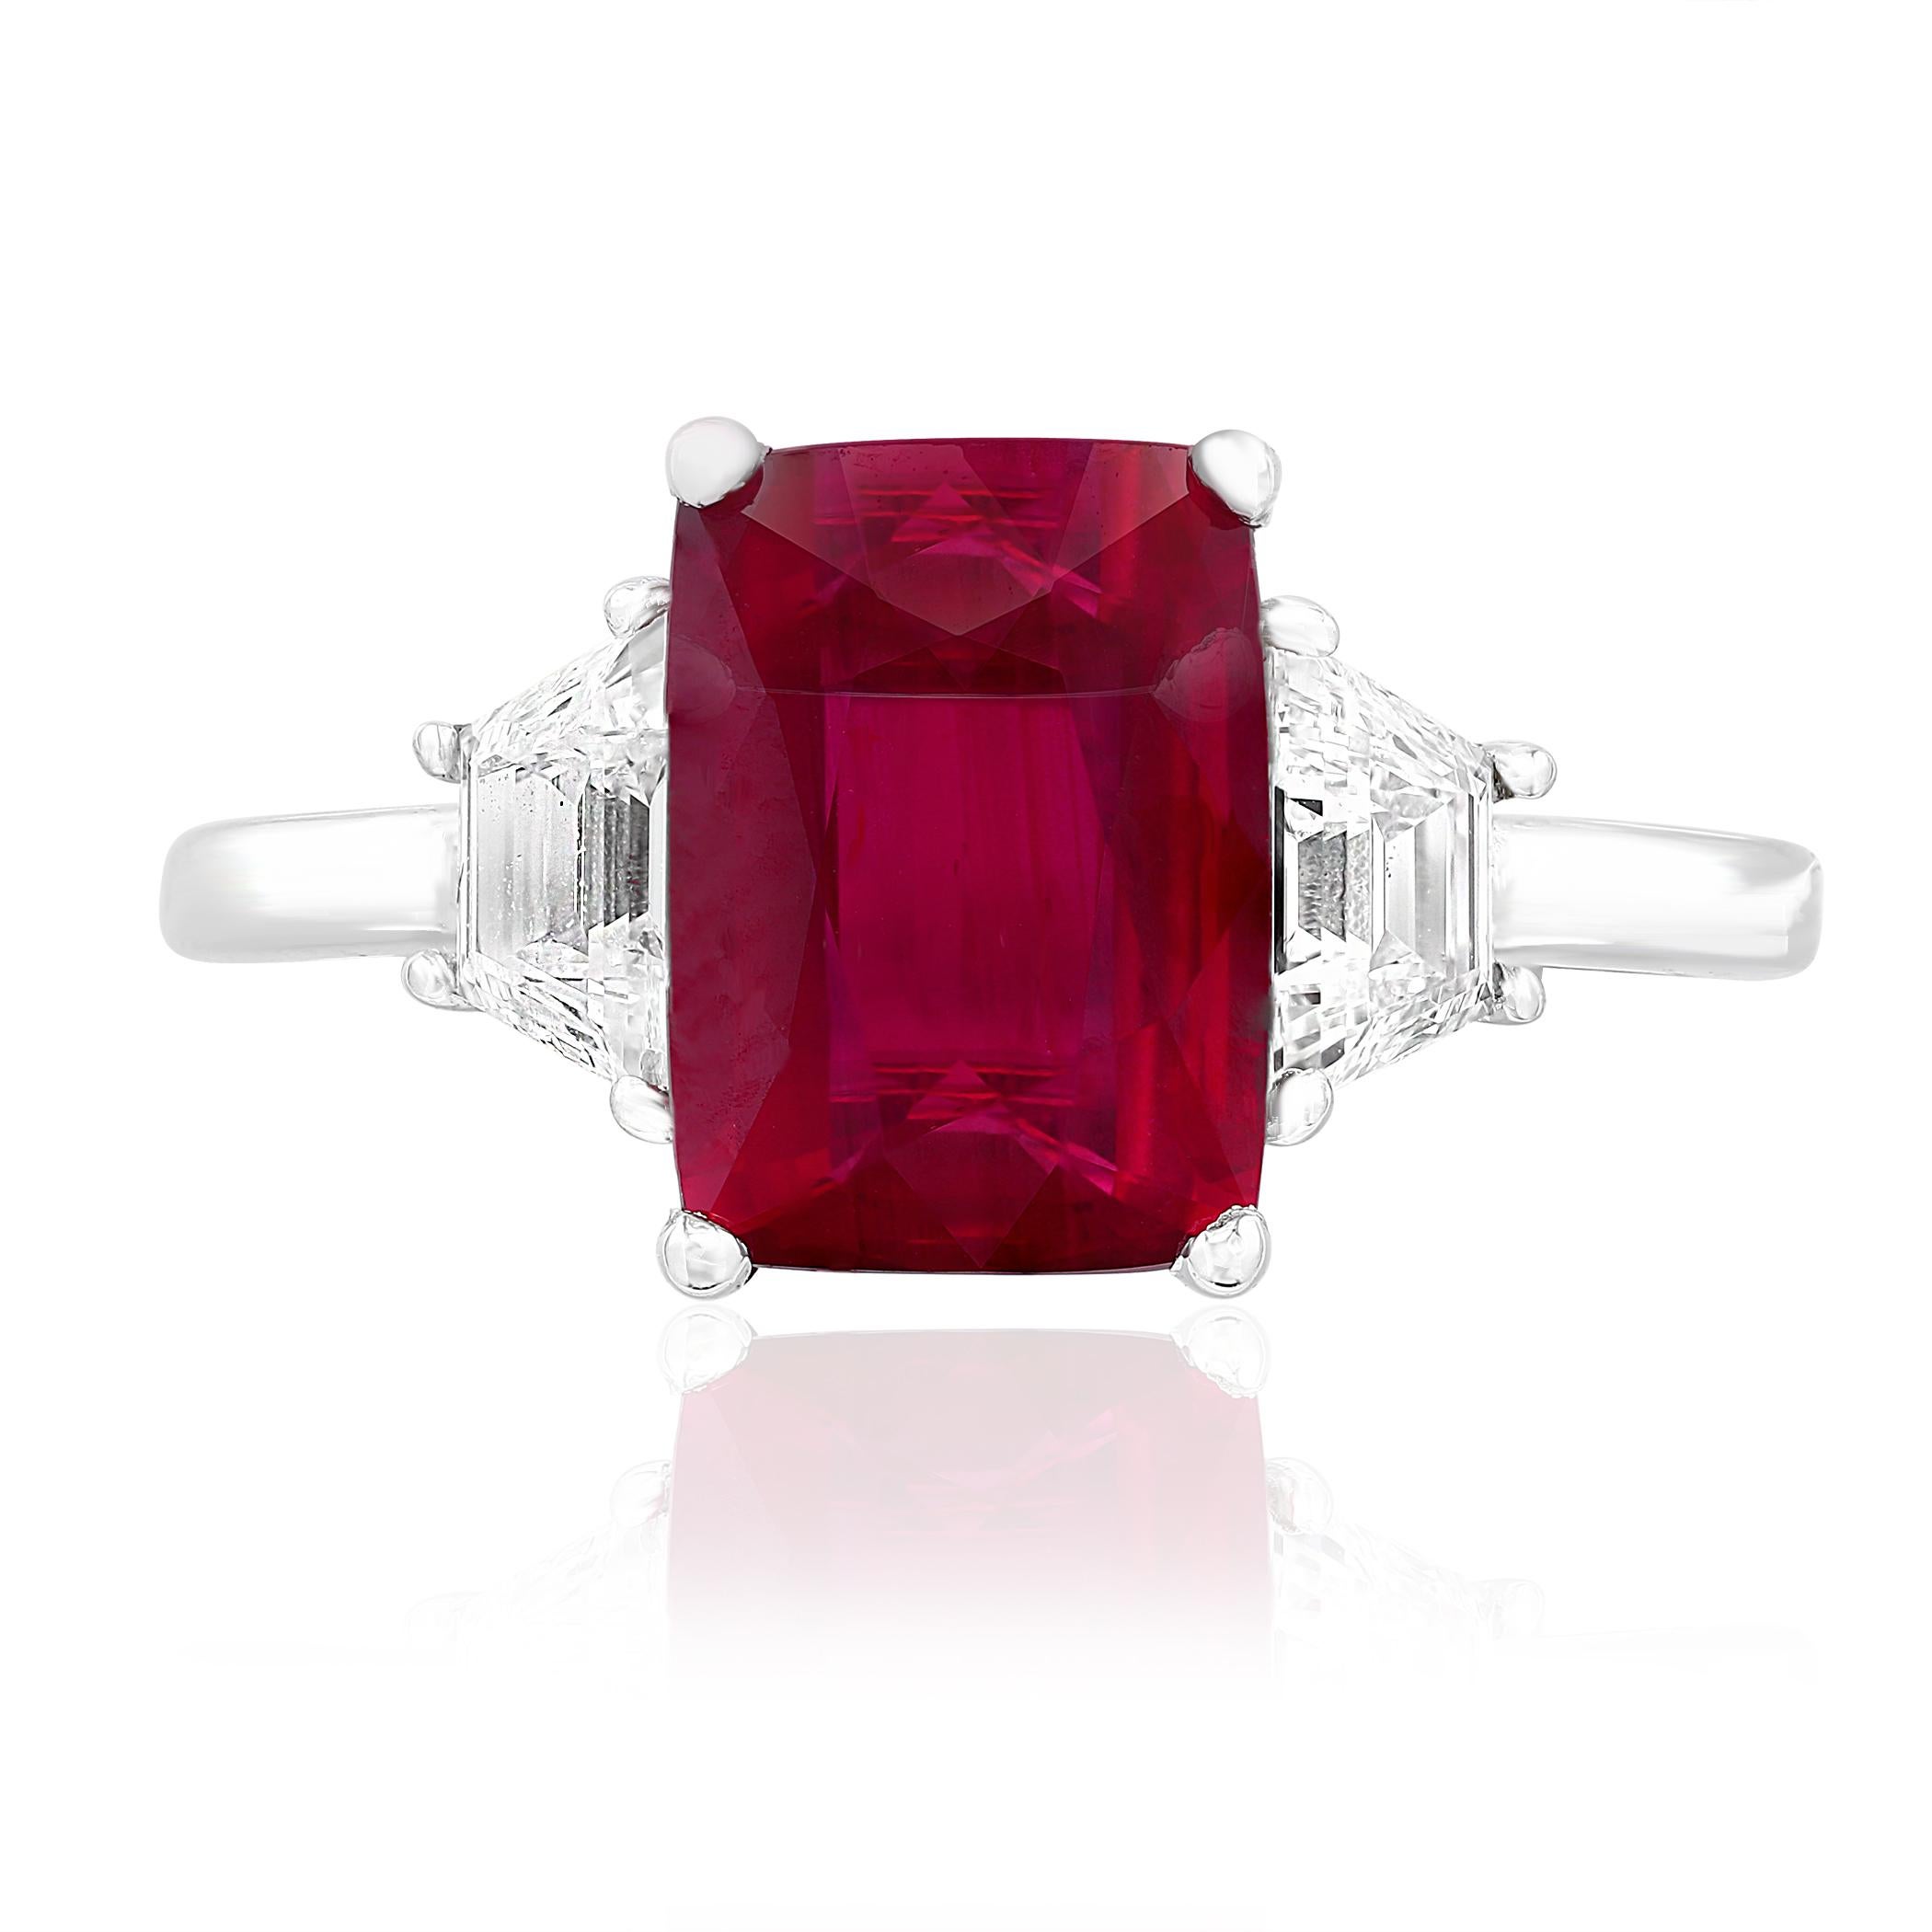 Showcases an Emerald cut, Natural Ruby weighing 2.66 carats, flanked by two brilliant cut trapezoid diamonds weighing 0.61 carats total. Elegantly set in a polished platinum composition.